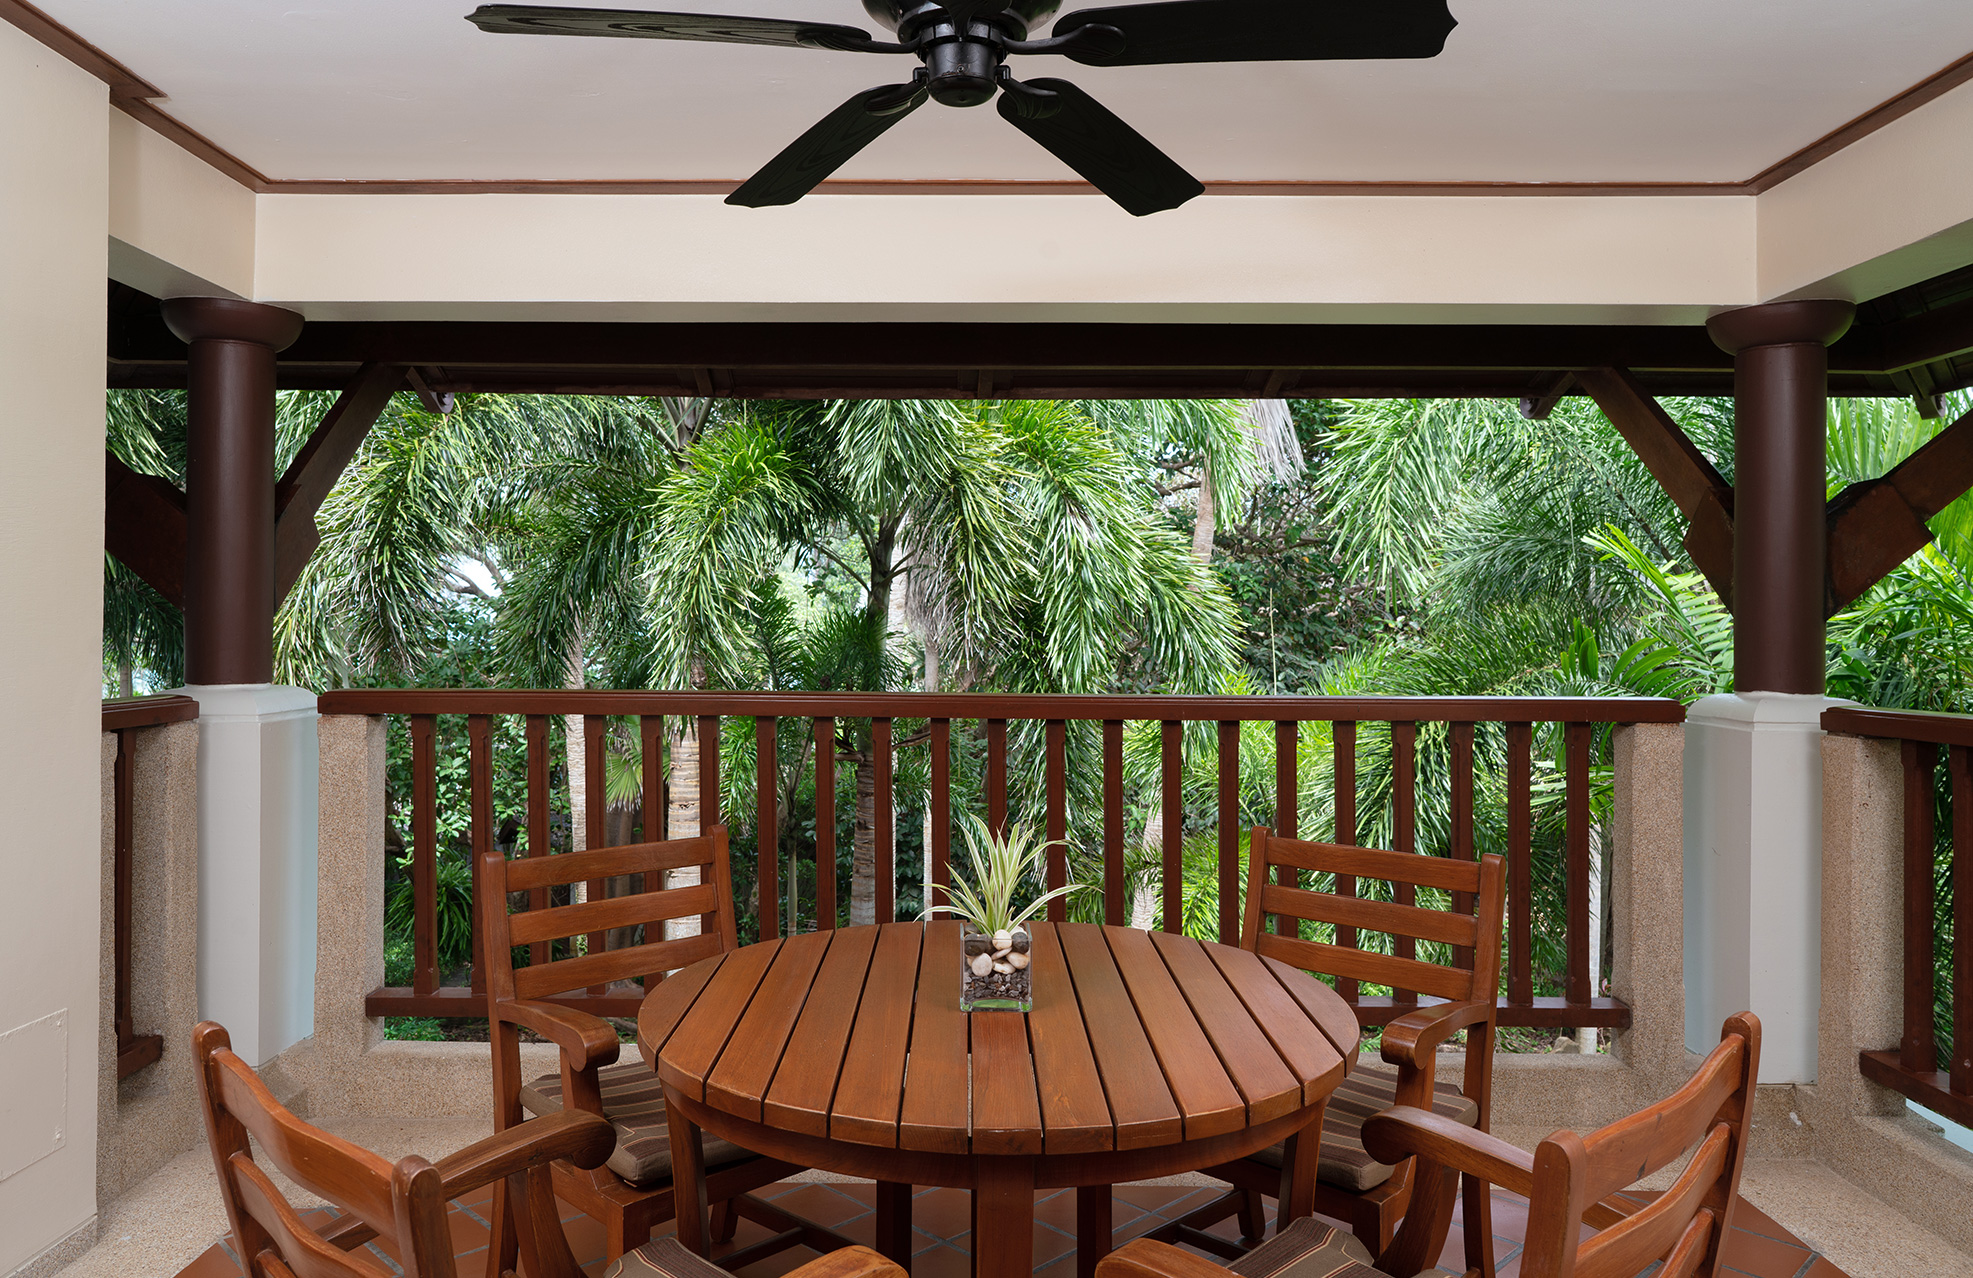 Wood deck with a round table surrounded by a backdrop of Palm Trees